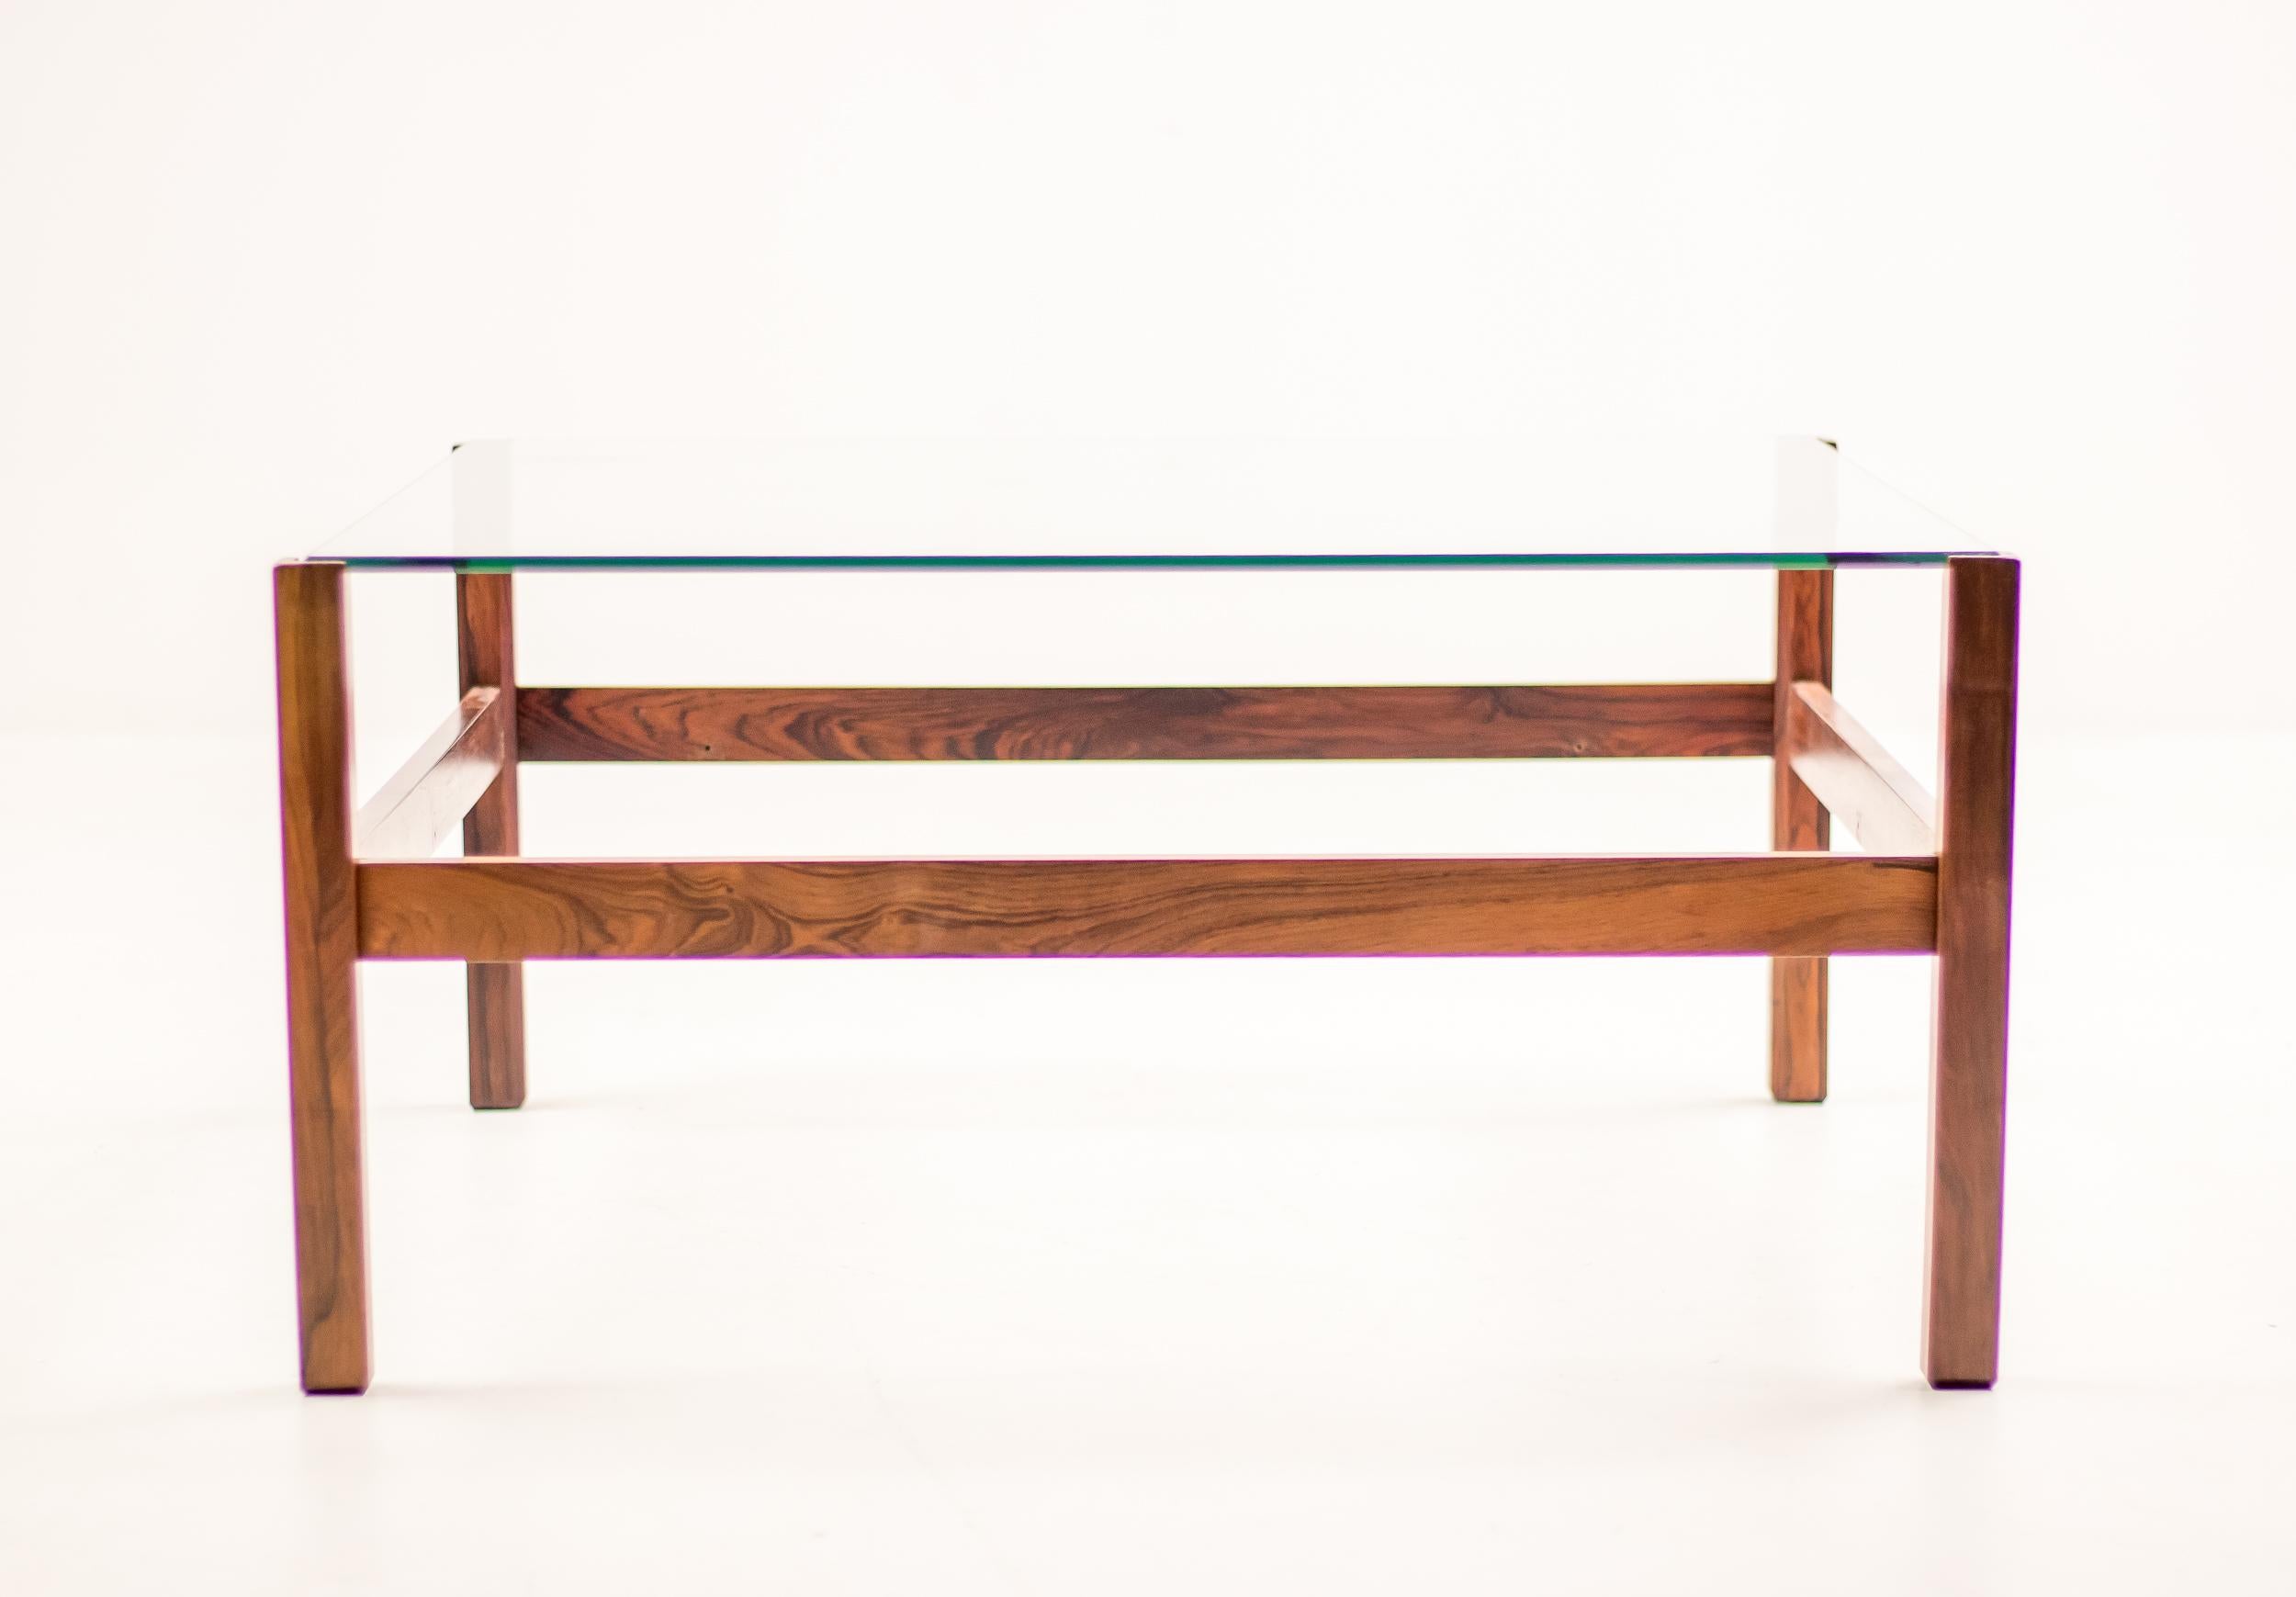 Beautiful Brazilian rosewood Mid-Century Modern architectural coffee table.
Refined geometrical base in solid rosewood with clear glass top.

Brazilian rosewood, also known as Dalbergia nigra, is a rare and valuable hardwood species that is native